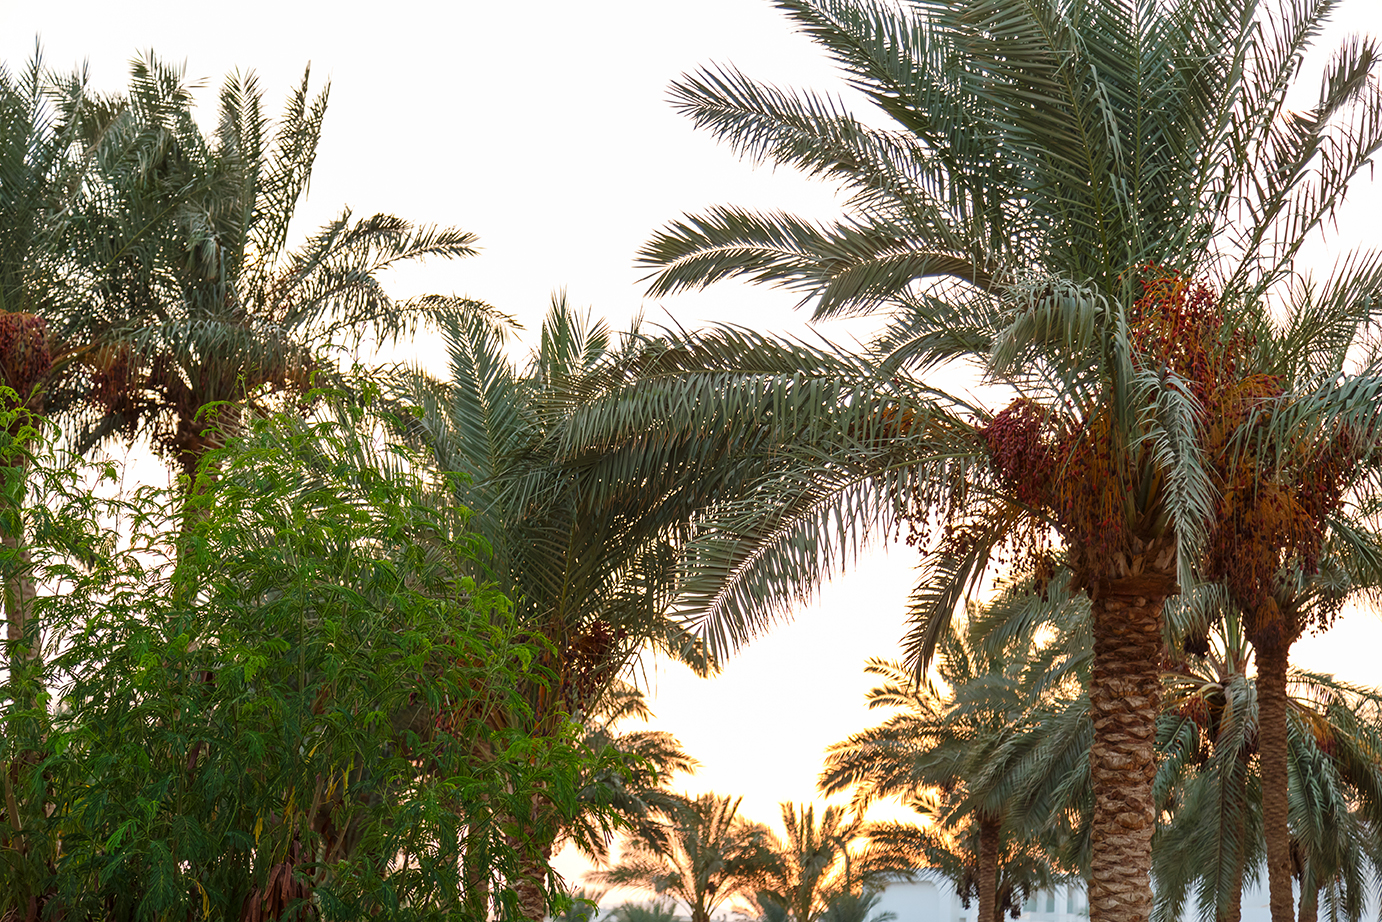 A serene oasis of date palms in the heart of the UAE desert, symbolizing the deep connection between the land and the Emirati people.